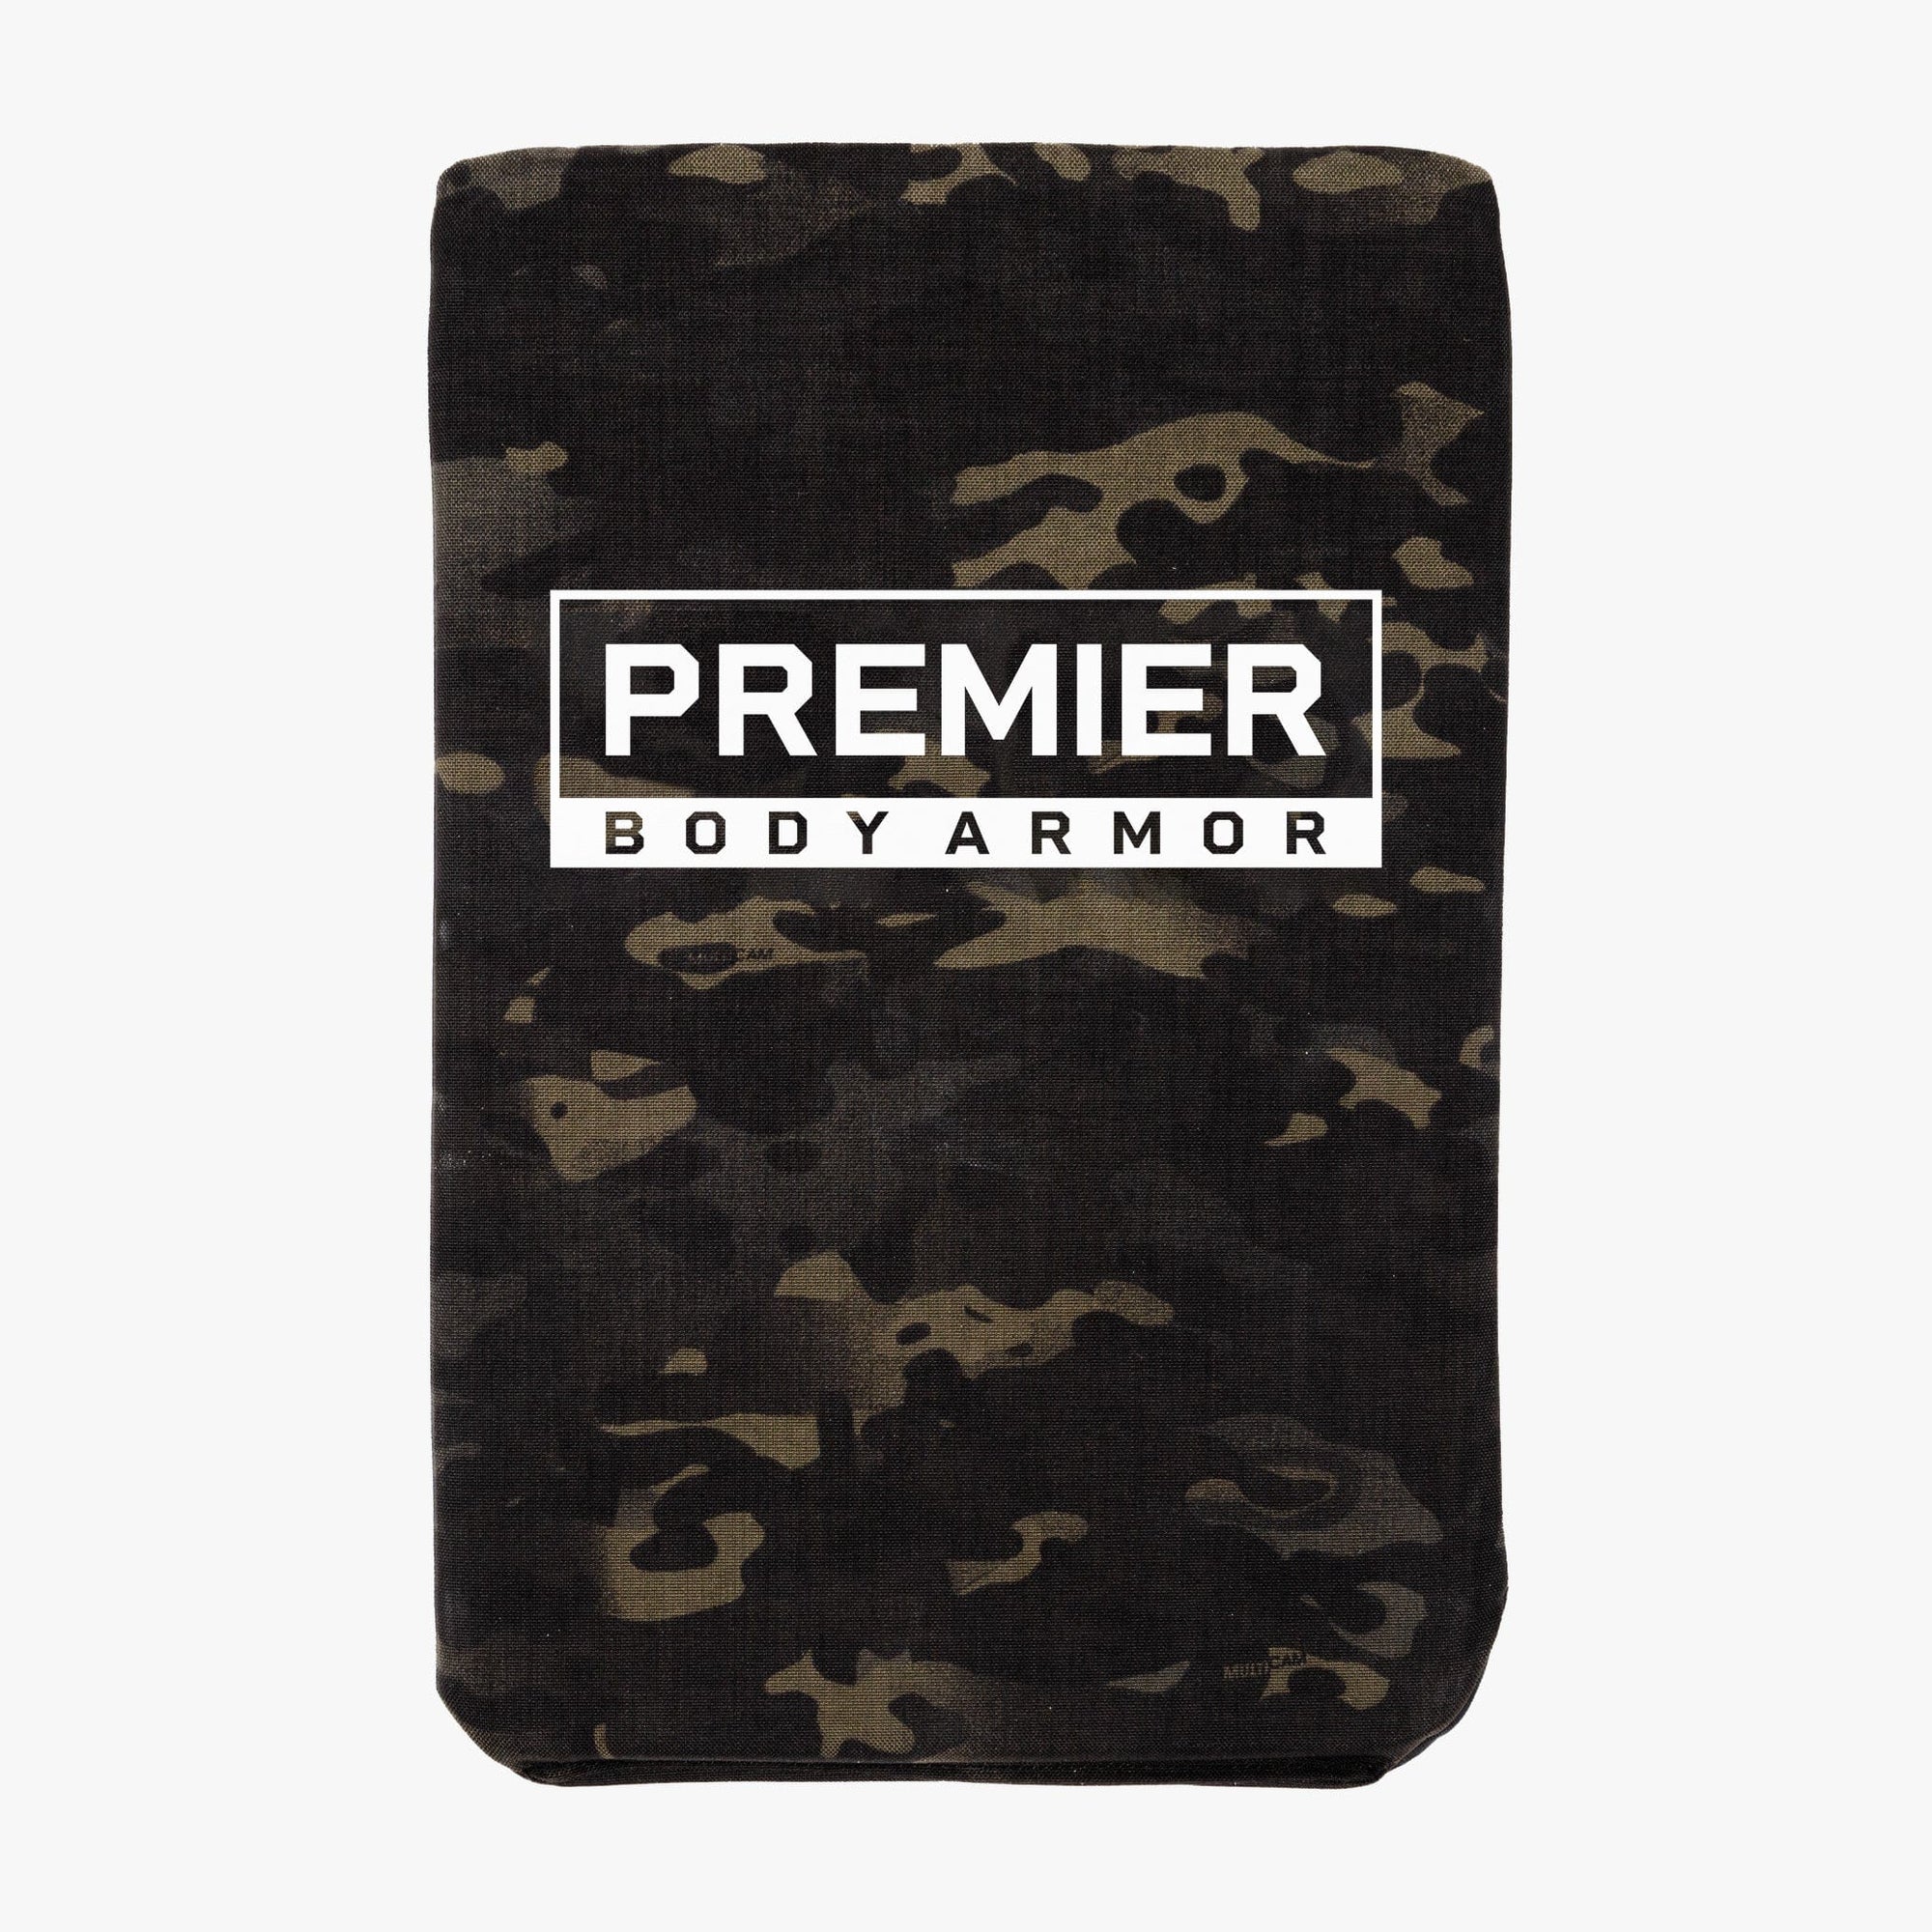 This level 3 body armor system is perfect for travel. These ballistic panels are lightweight armor that offer protection from all handgun rounds. 